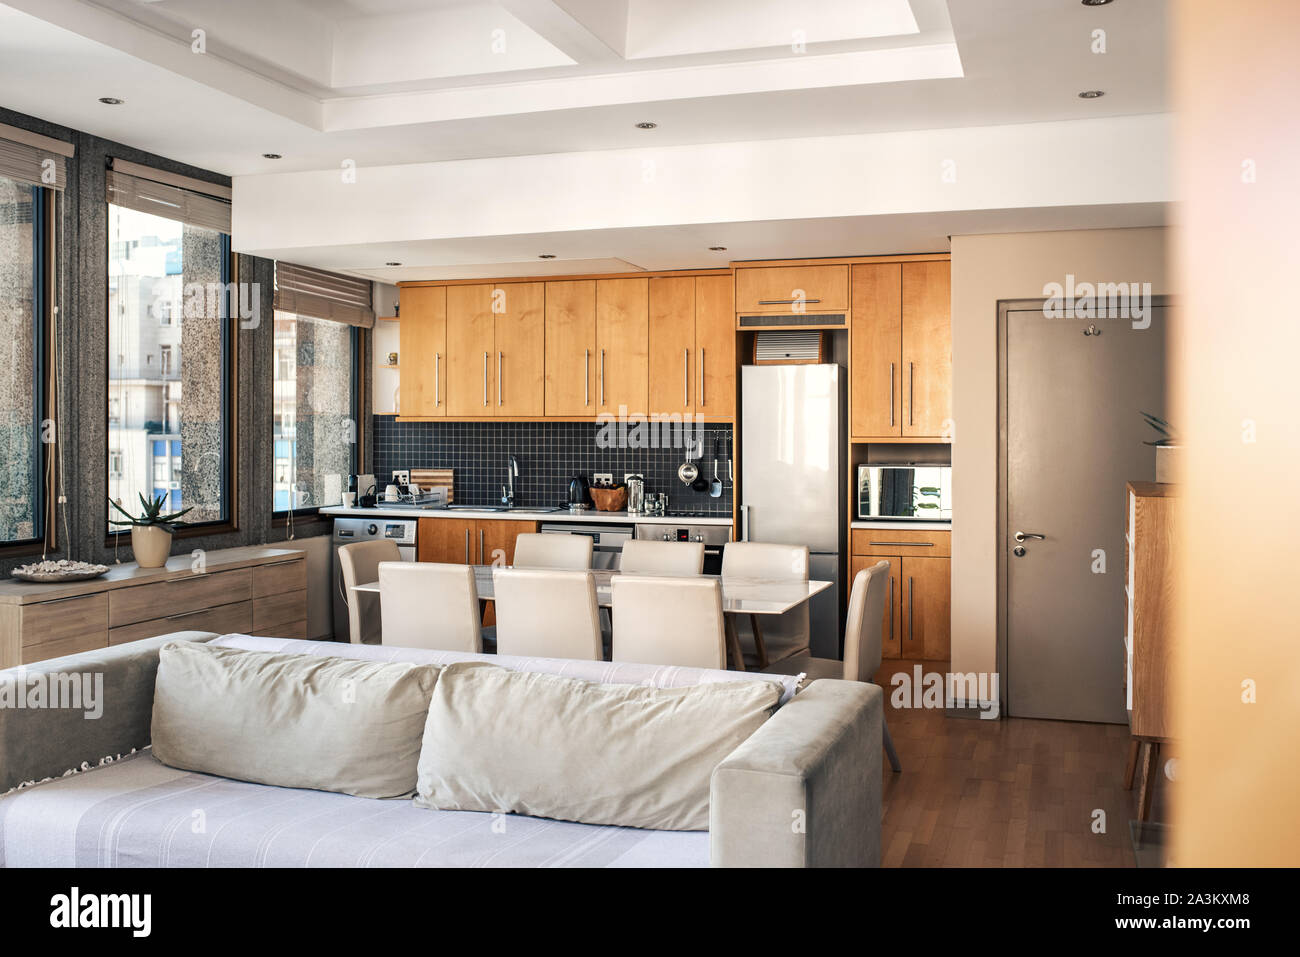 Interior of the lounge and kitchen area of an apartment Stock Photo